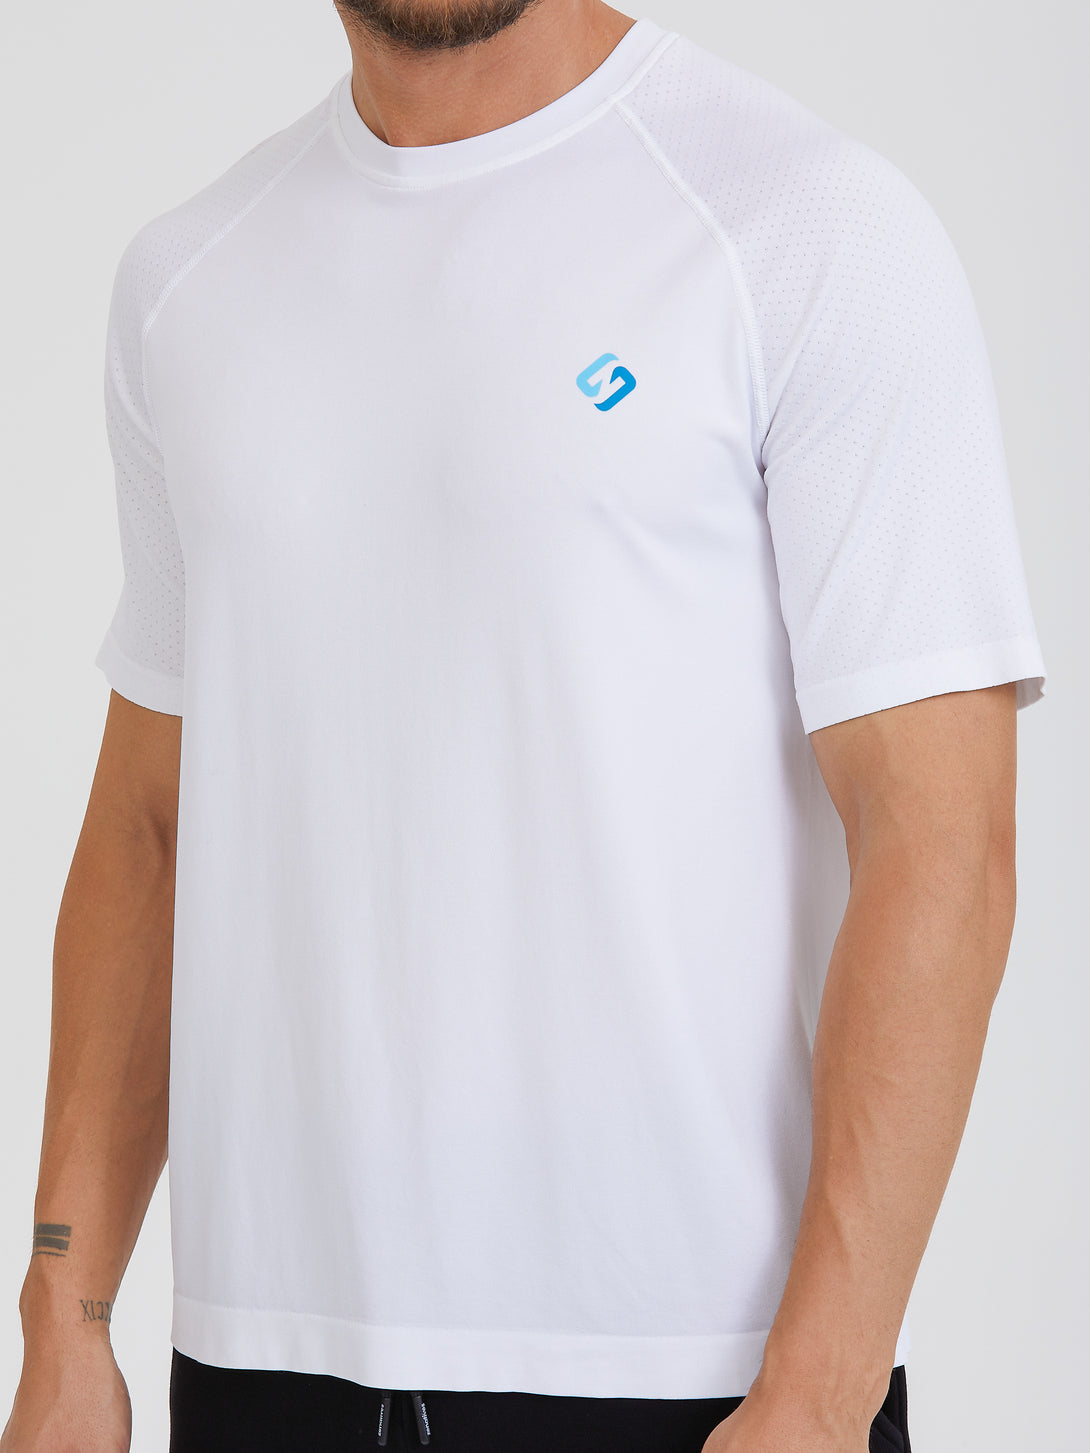 A Man Wearing White Color Seamless Workout Comfort T-Shirt